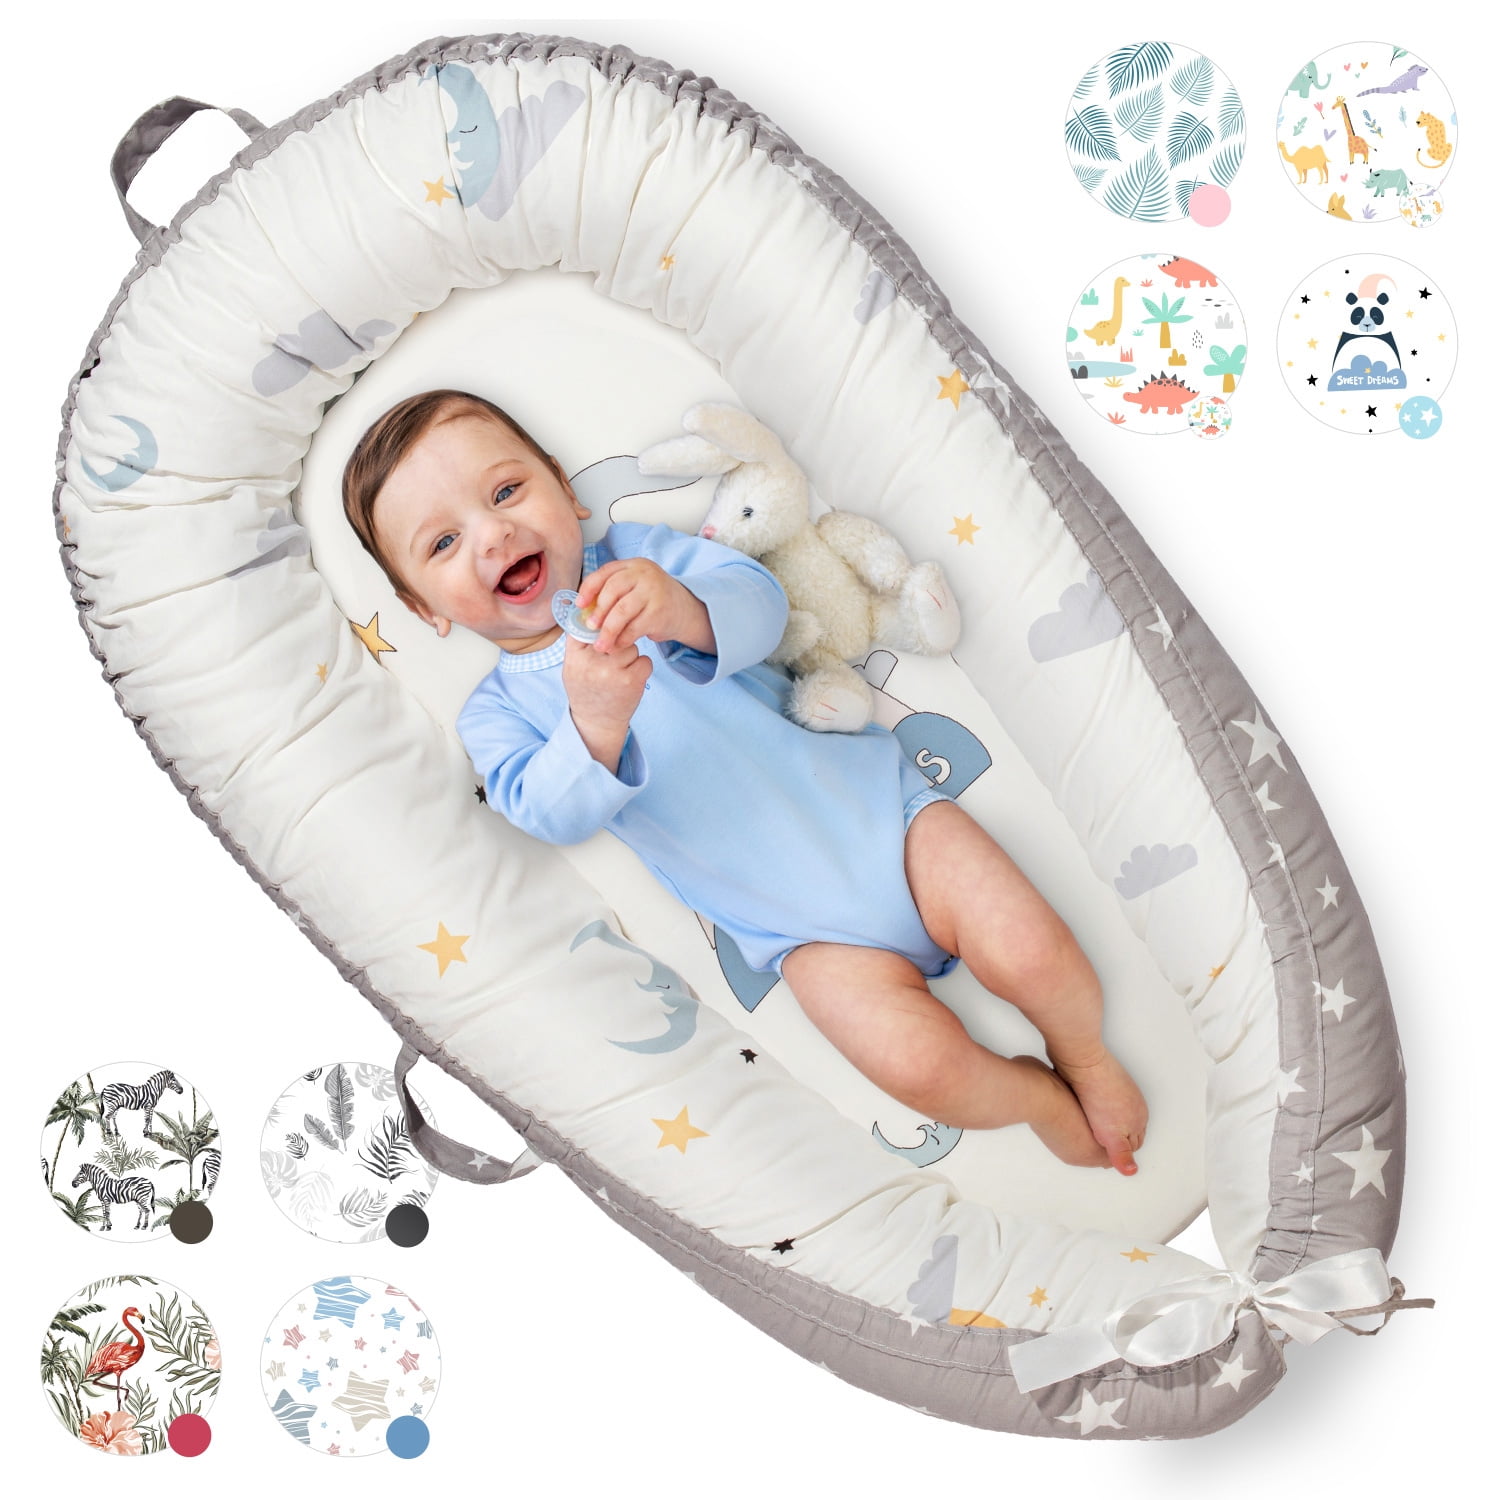 Ultra Soft and Comfortable Baby Nest - Buy Now at Hilo Shop – Hilo